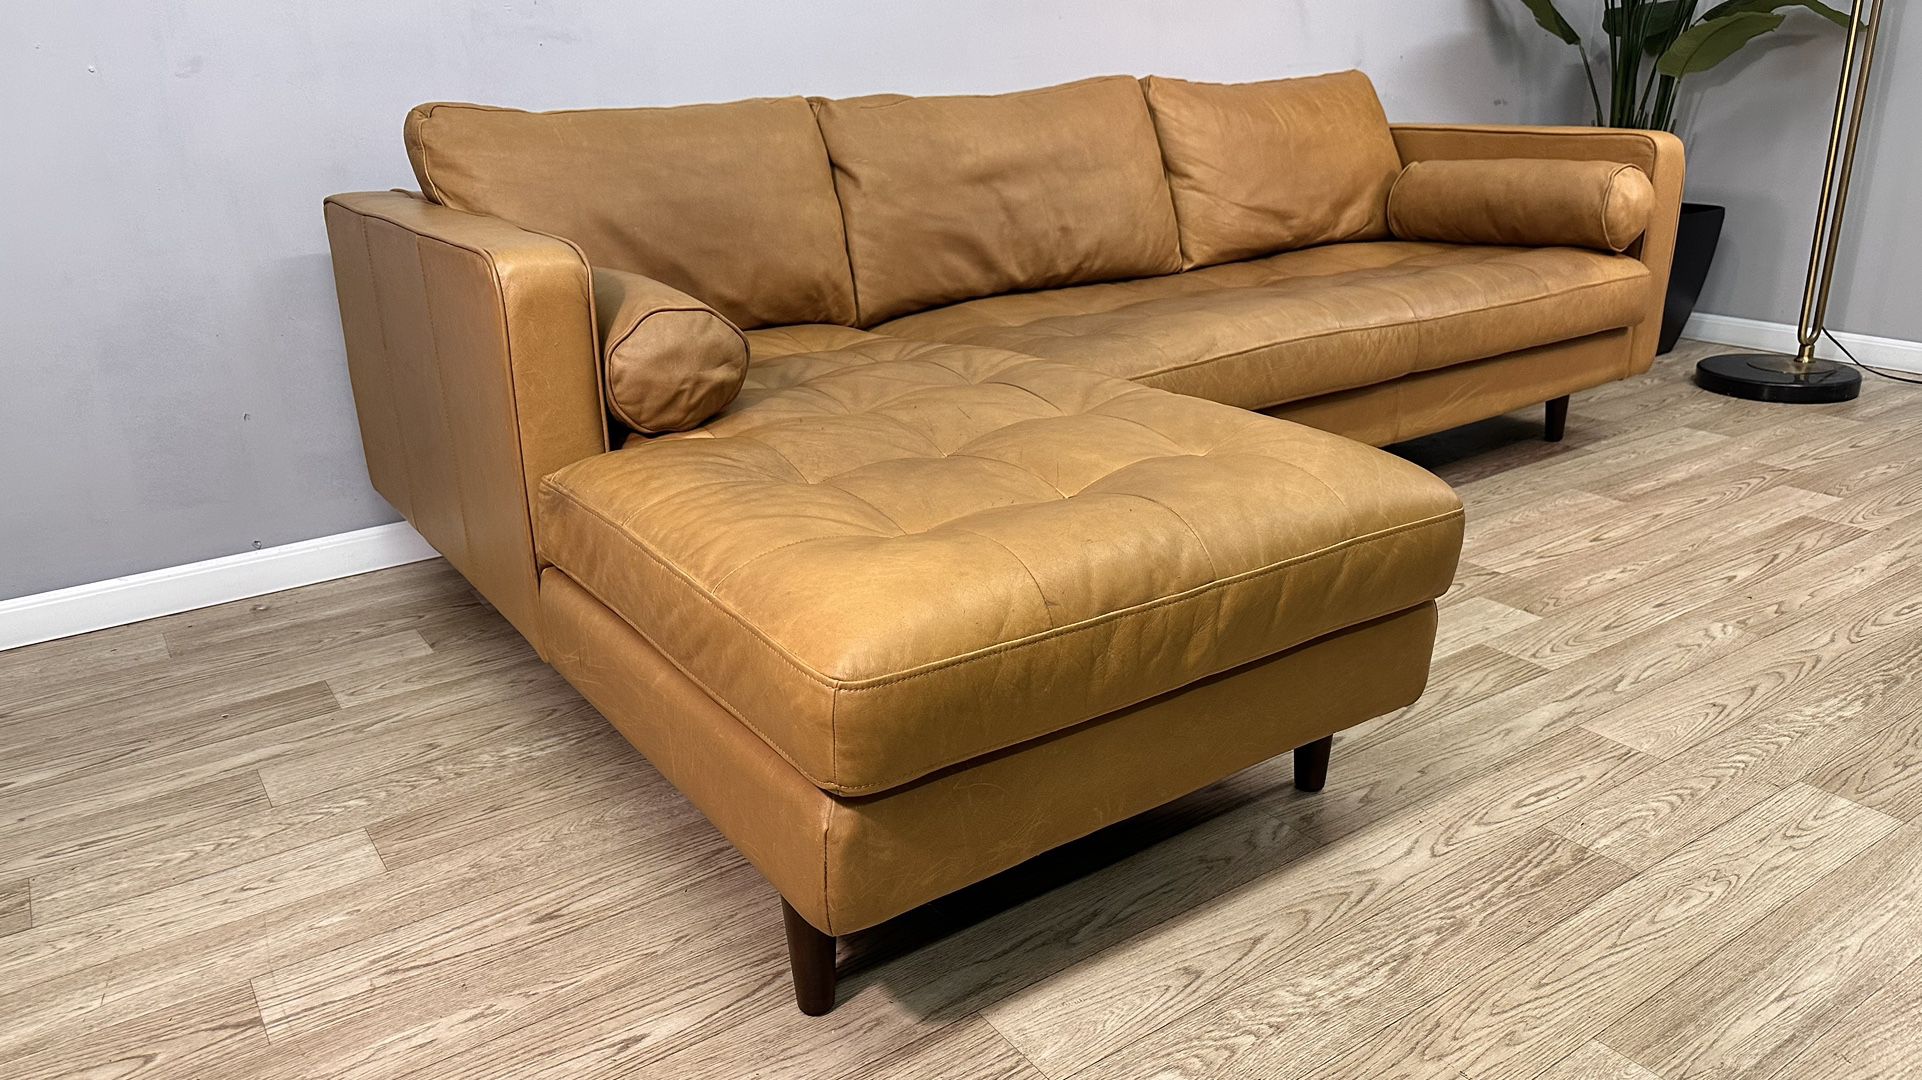 Article Sven Leather Sectional Sofa *Delivery Options*